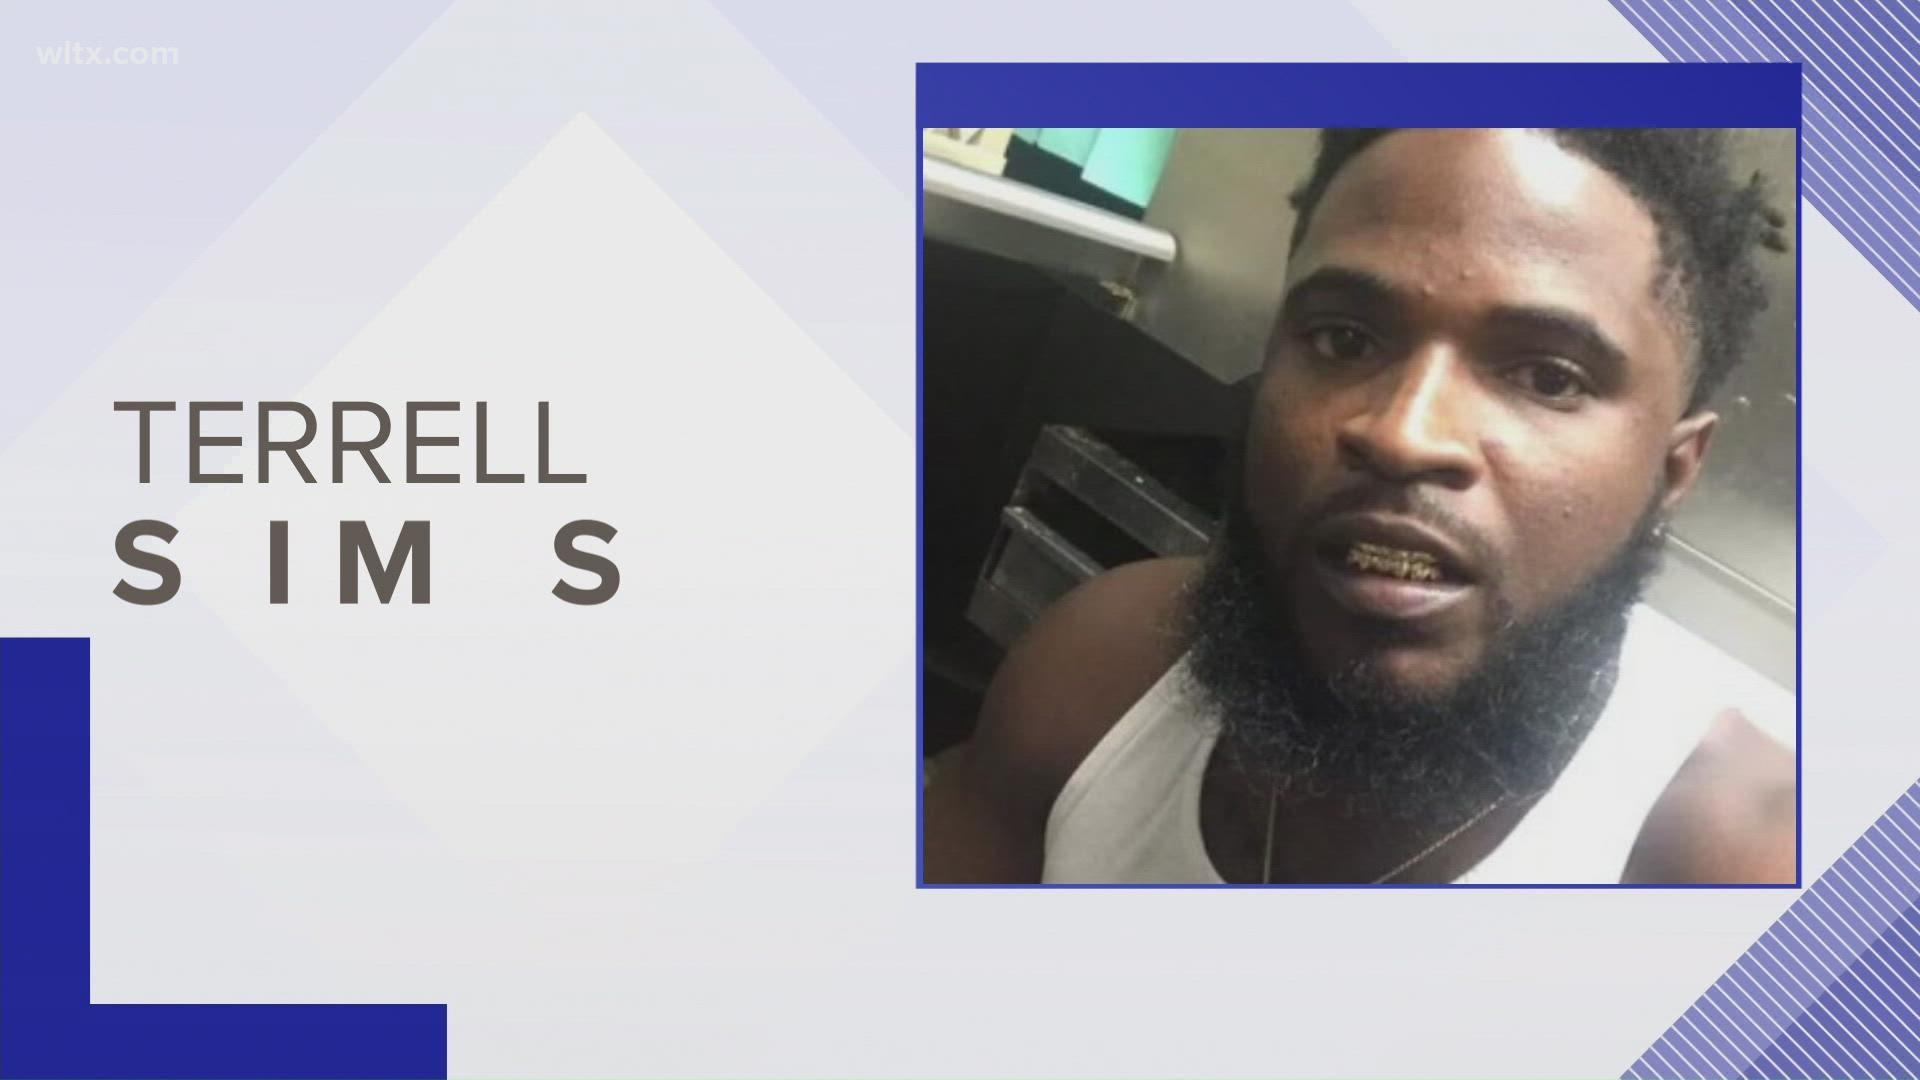 Investigators say the woman charged is also the person who notified police 26-year-old Terrell Sims was missing before Christmas.